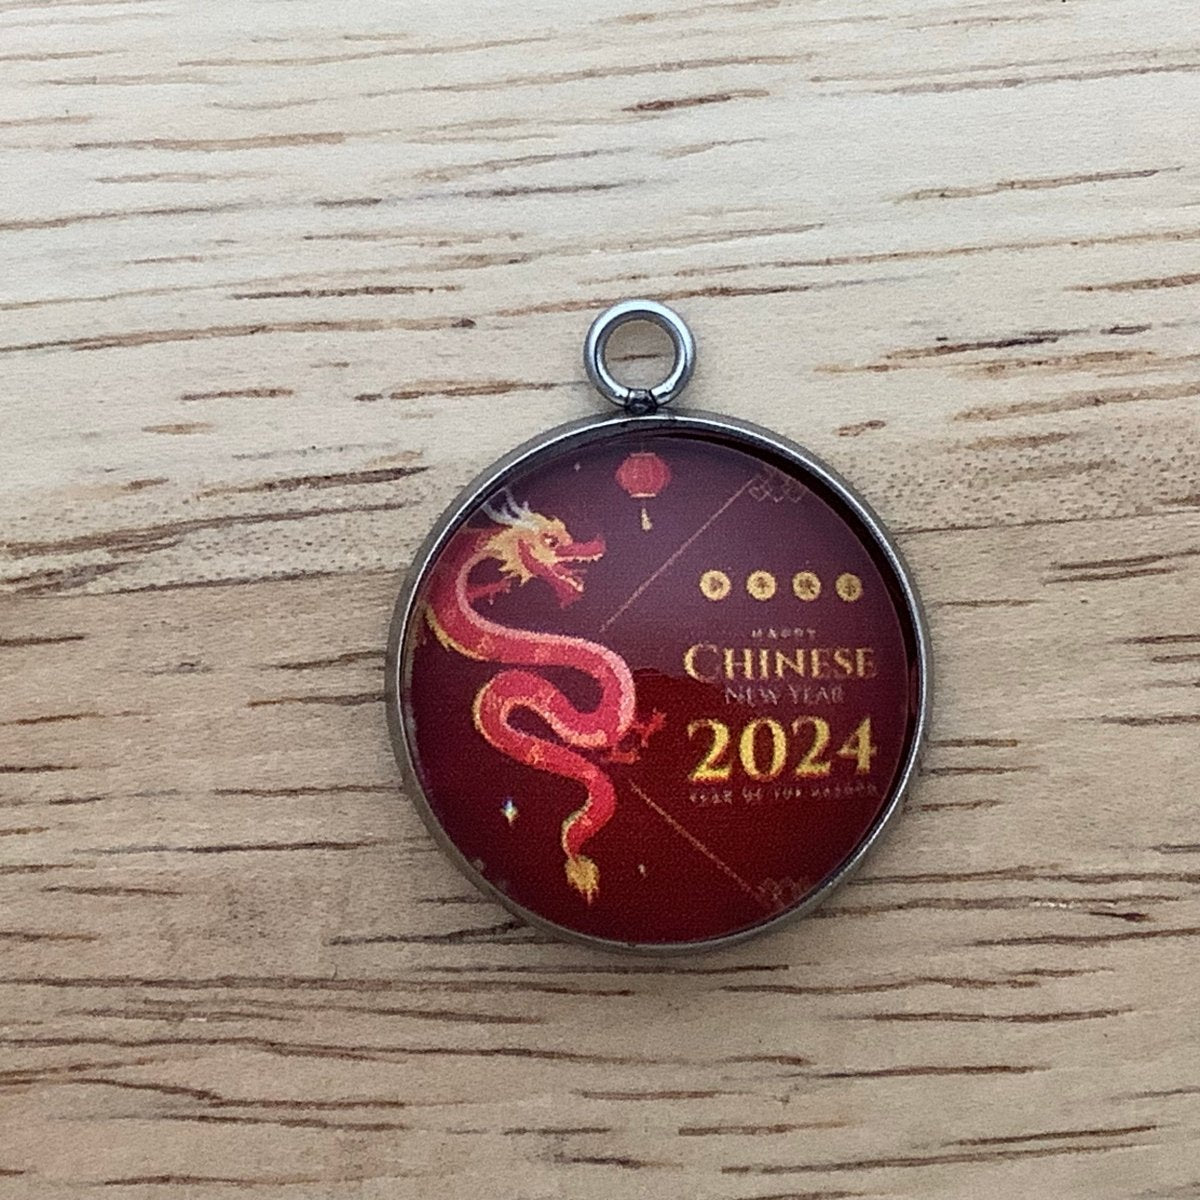 Chinese New Year, Year of The Dragon, Charms for Jewelry Making - ILikeWorms Style 8 / 14mm - Small